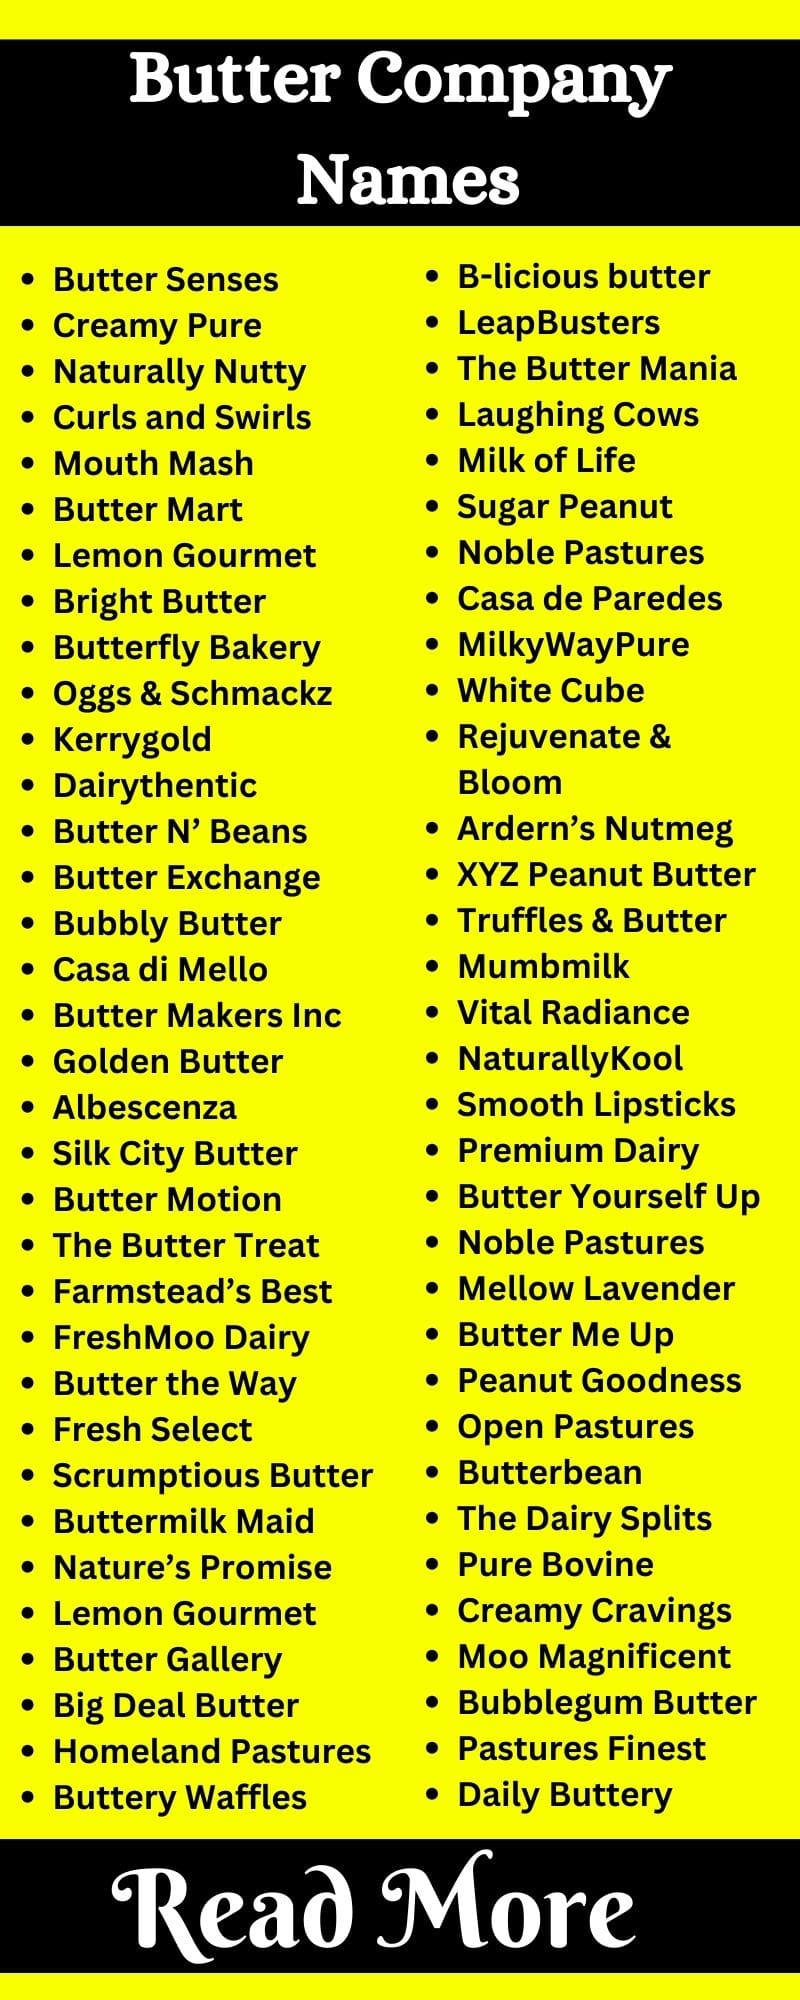 Funny Butter Names: 564+ Catchy & Unique Butter Company Name Ideas